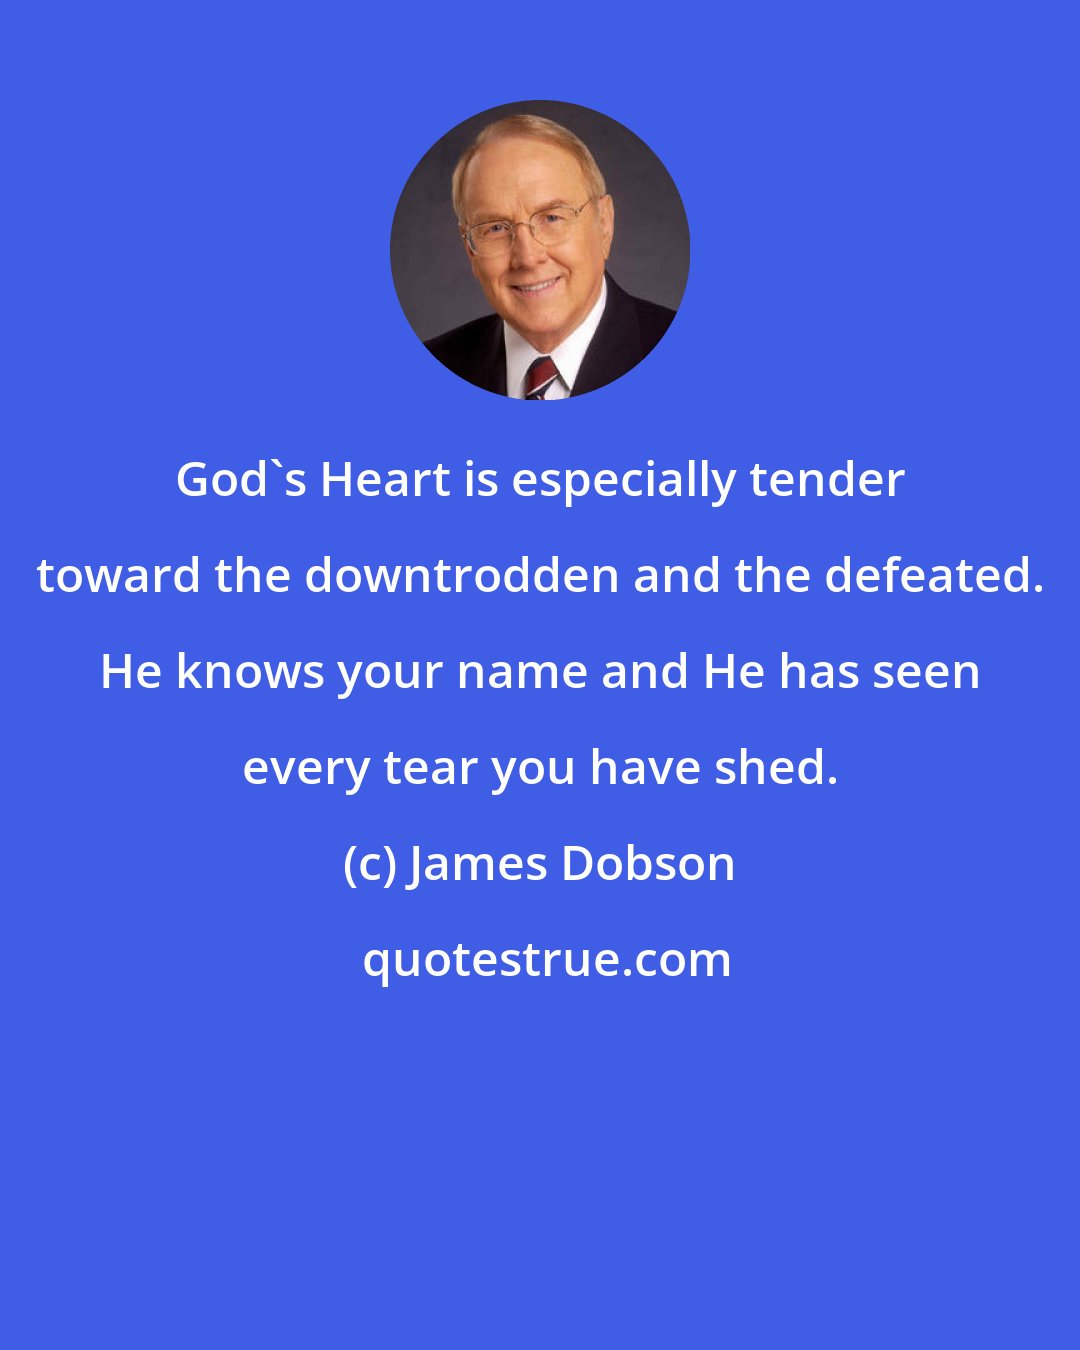 James Dobson: God's Heart is especially tender toward the downtrodden and the defeated. He knows your name and He has seen every tear you have shed.